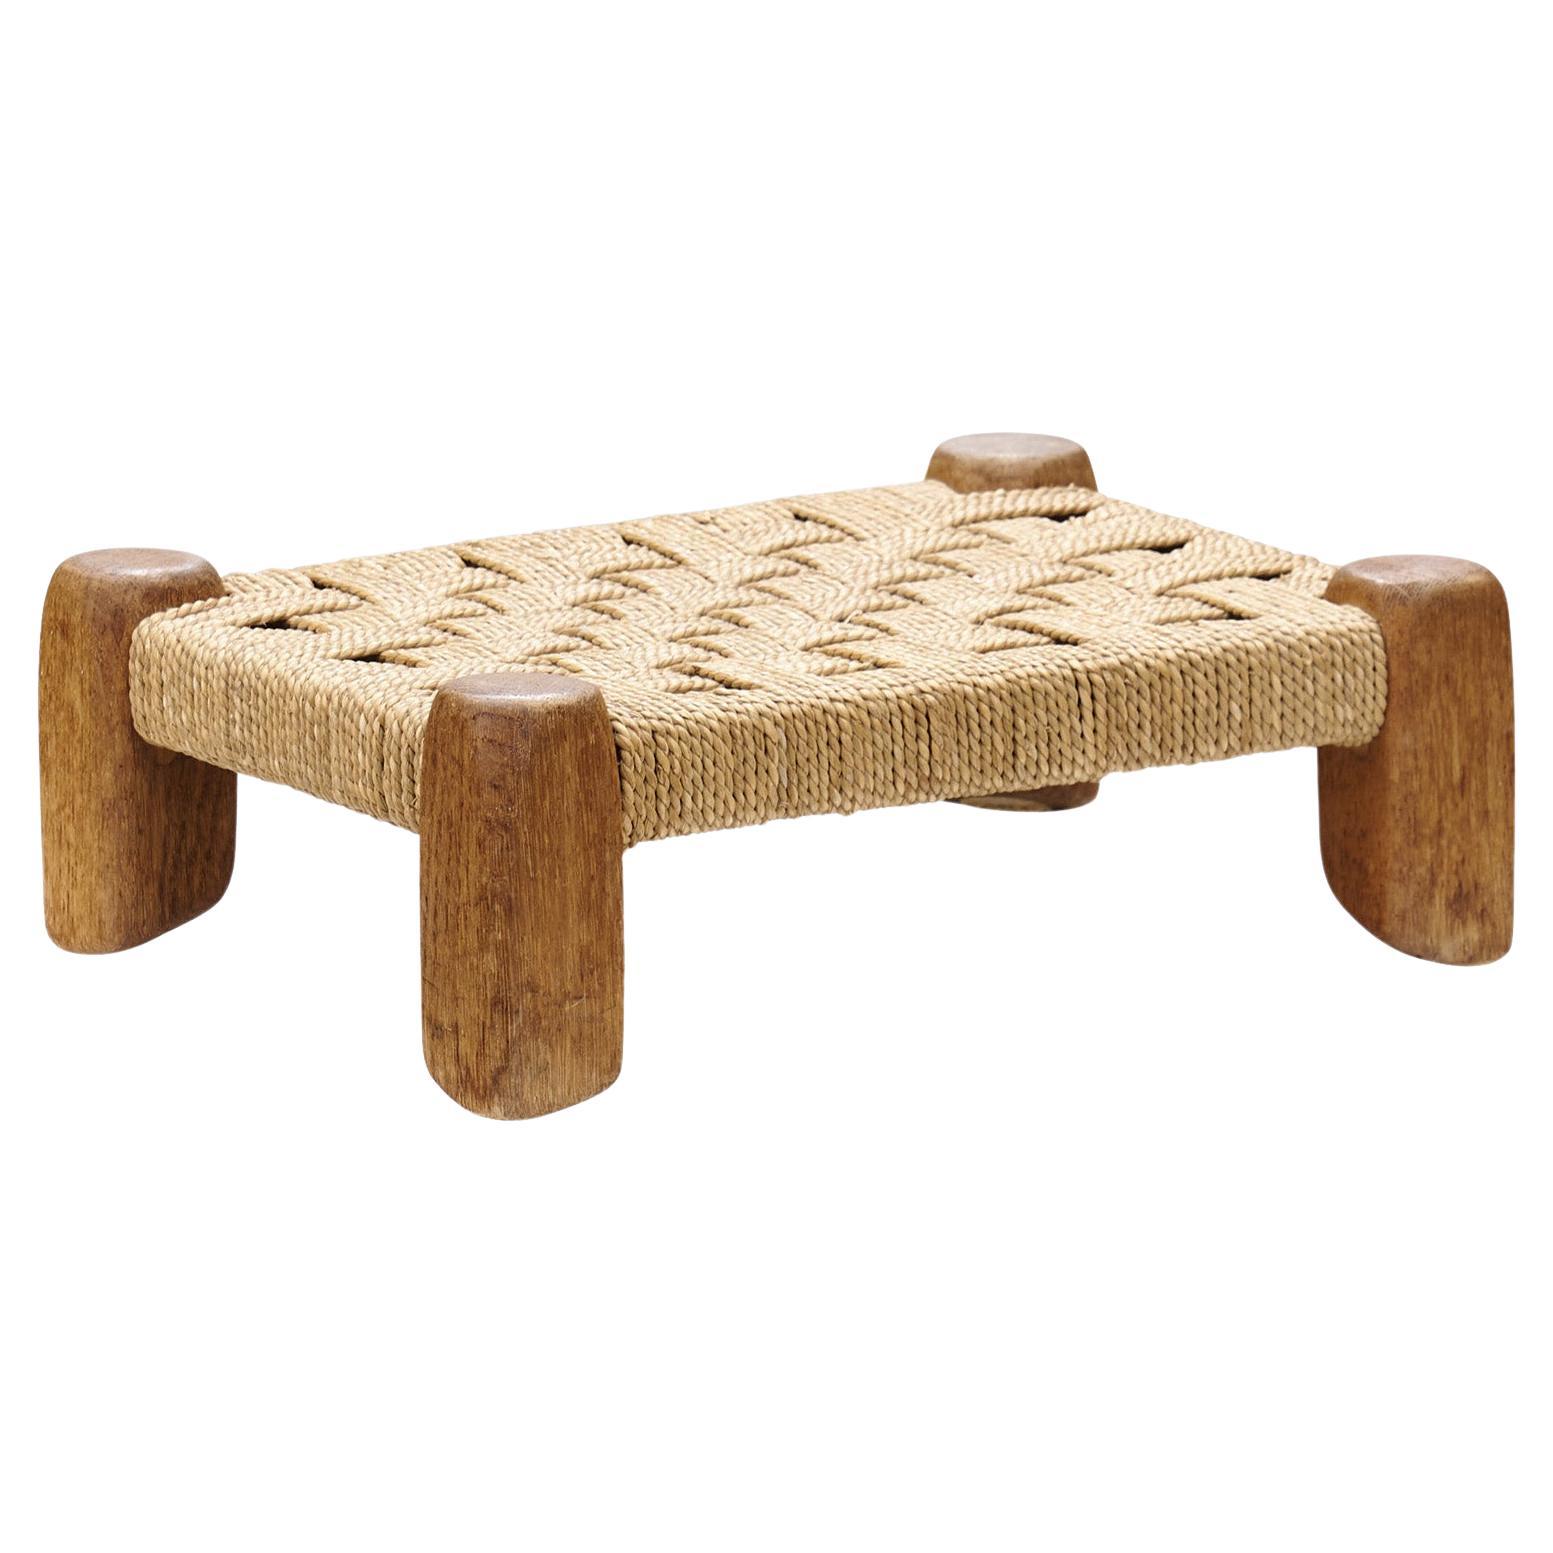 Woven Rush and Wood Stool, Europe ca 1950s For Sale